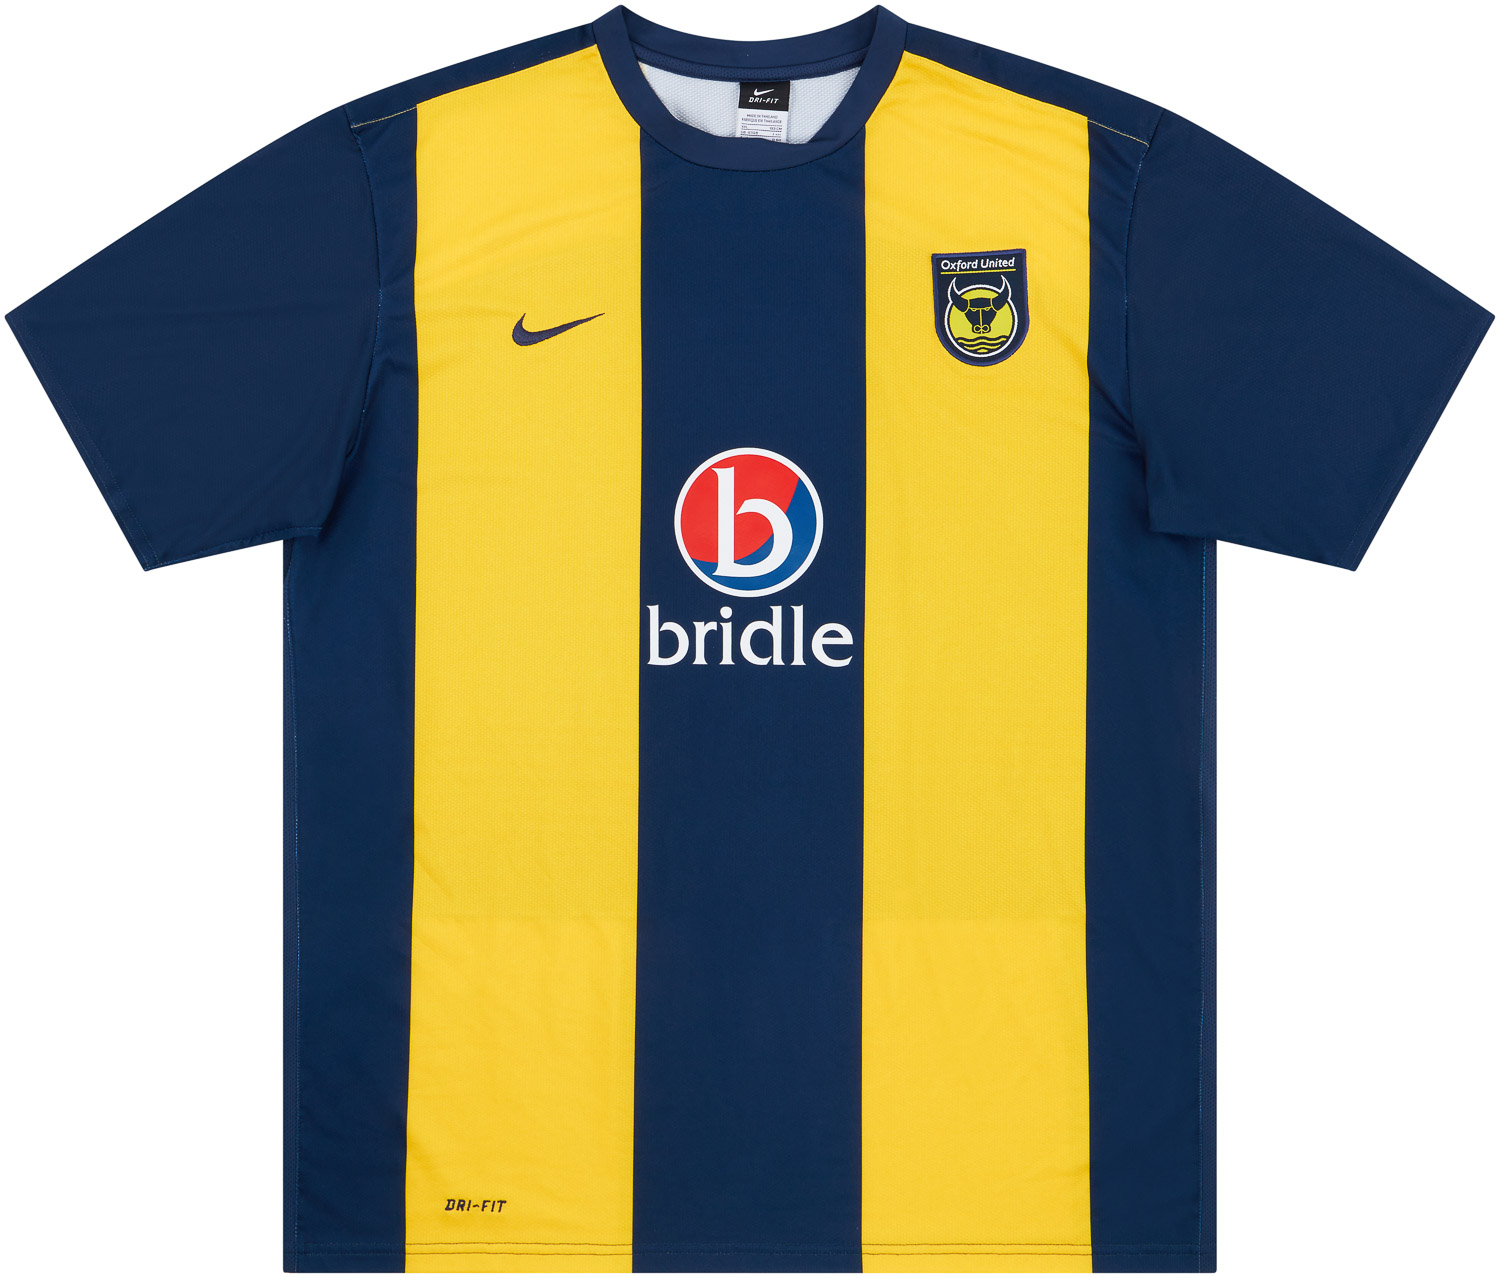 Oxford United Home football shirt 2006 - 2008. Sponsored by Buildbase